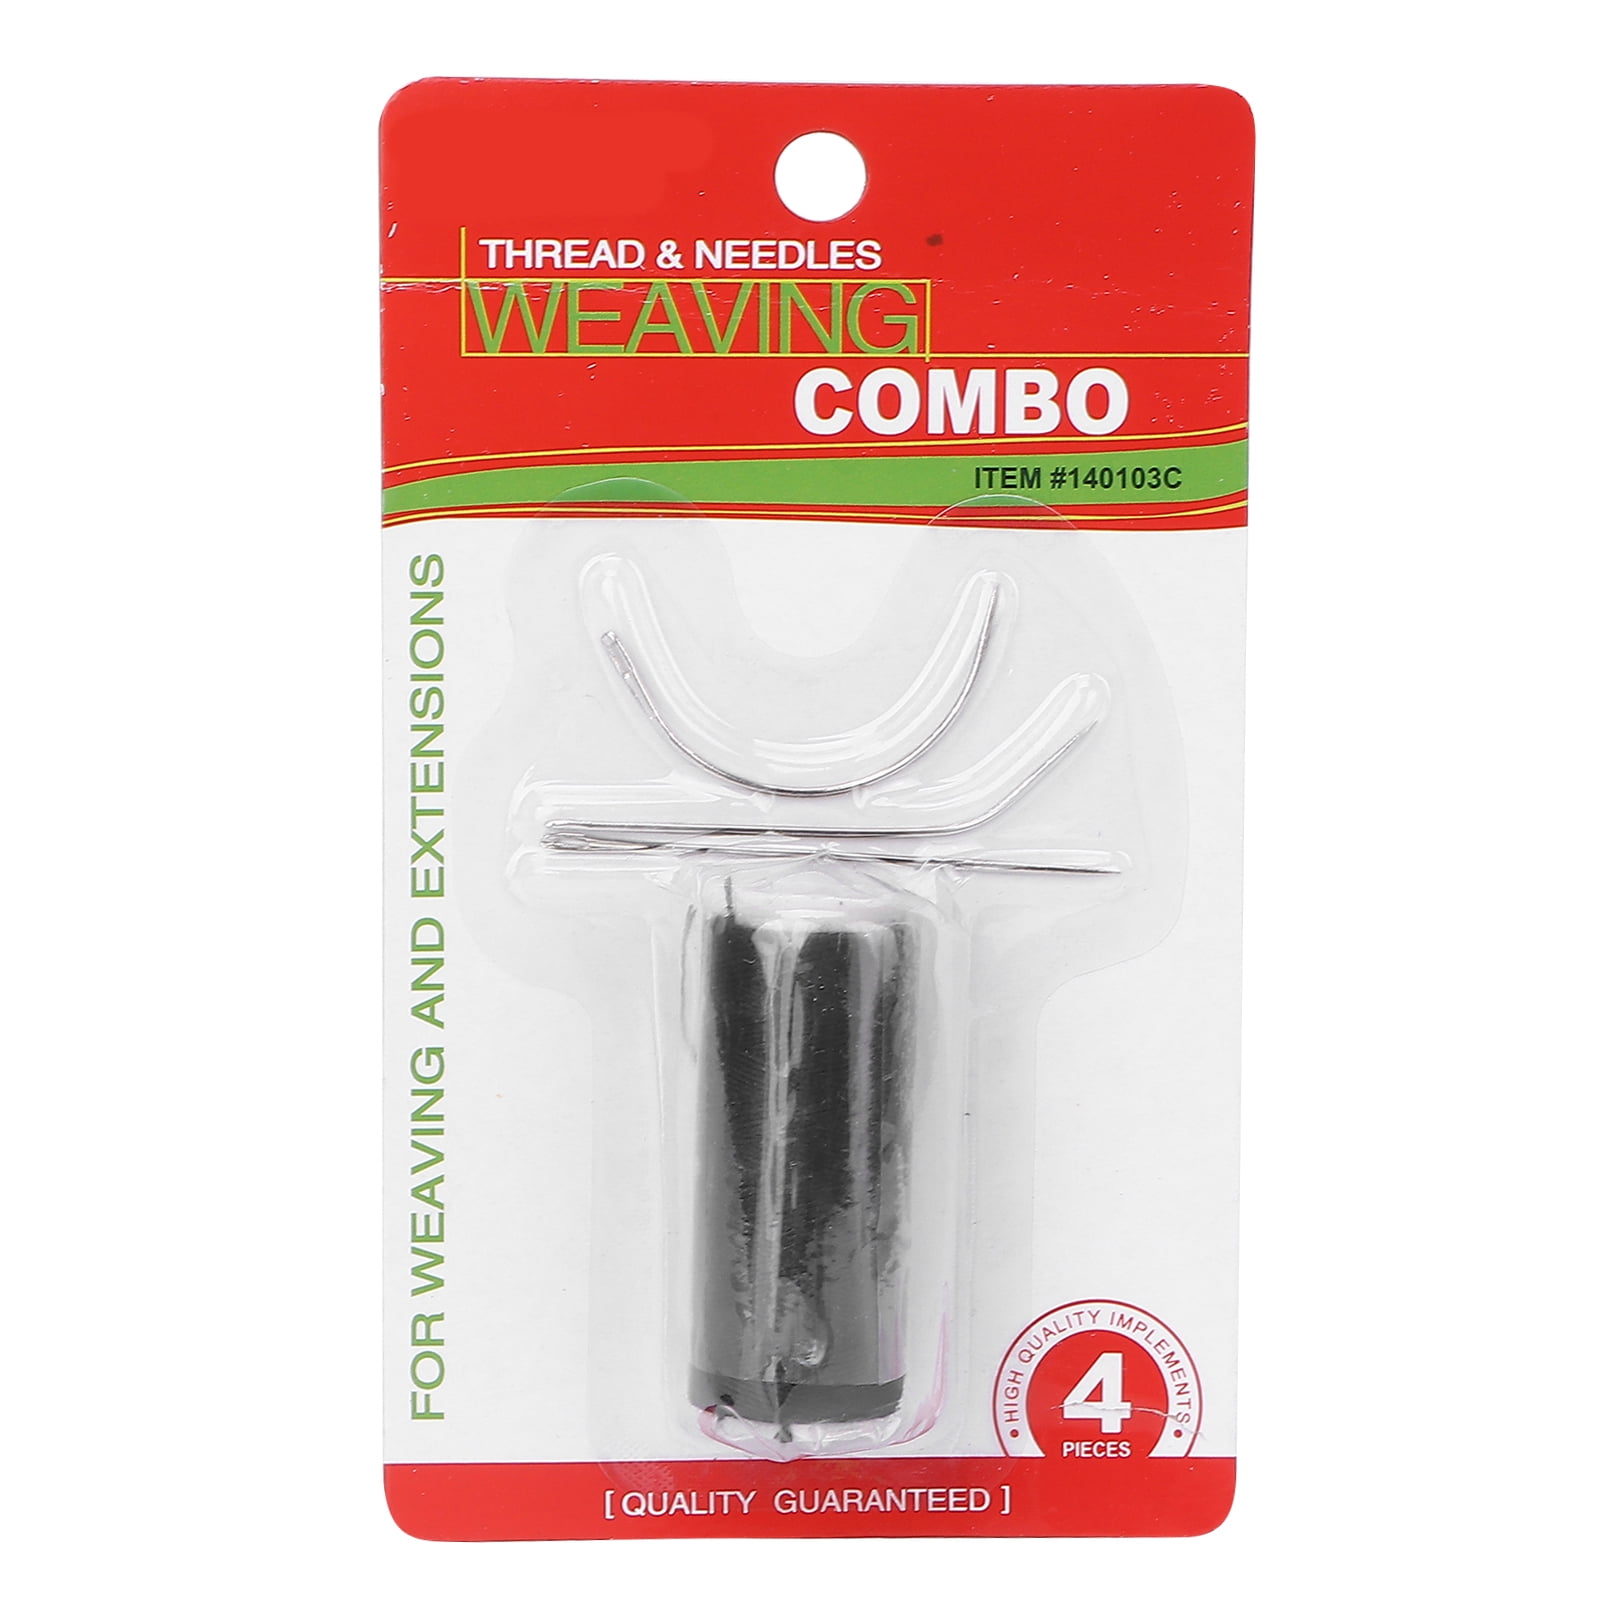 weaving needle combo deal thread with